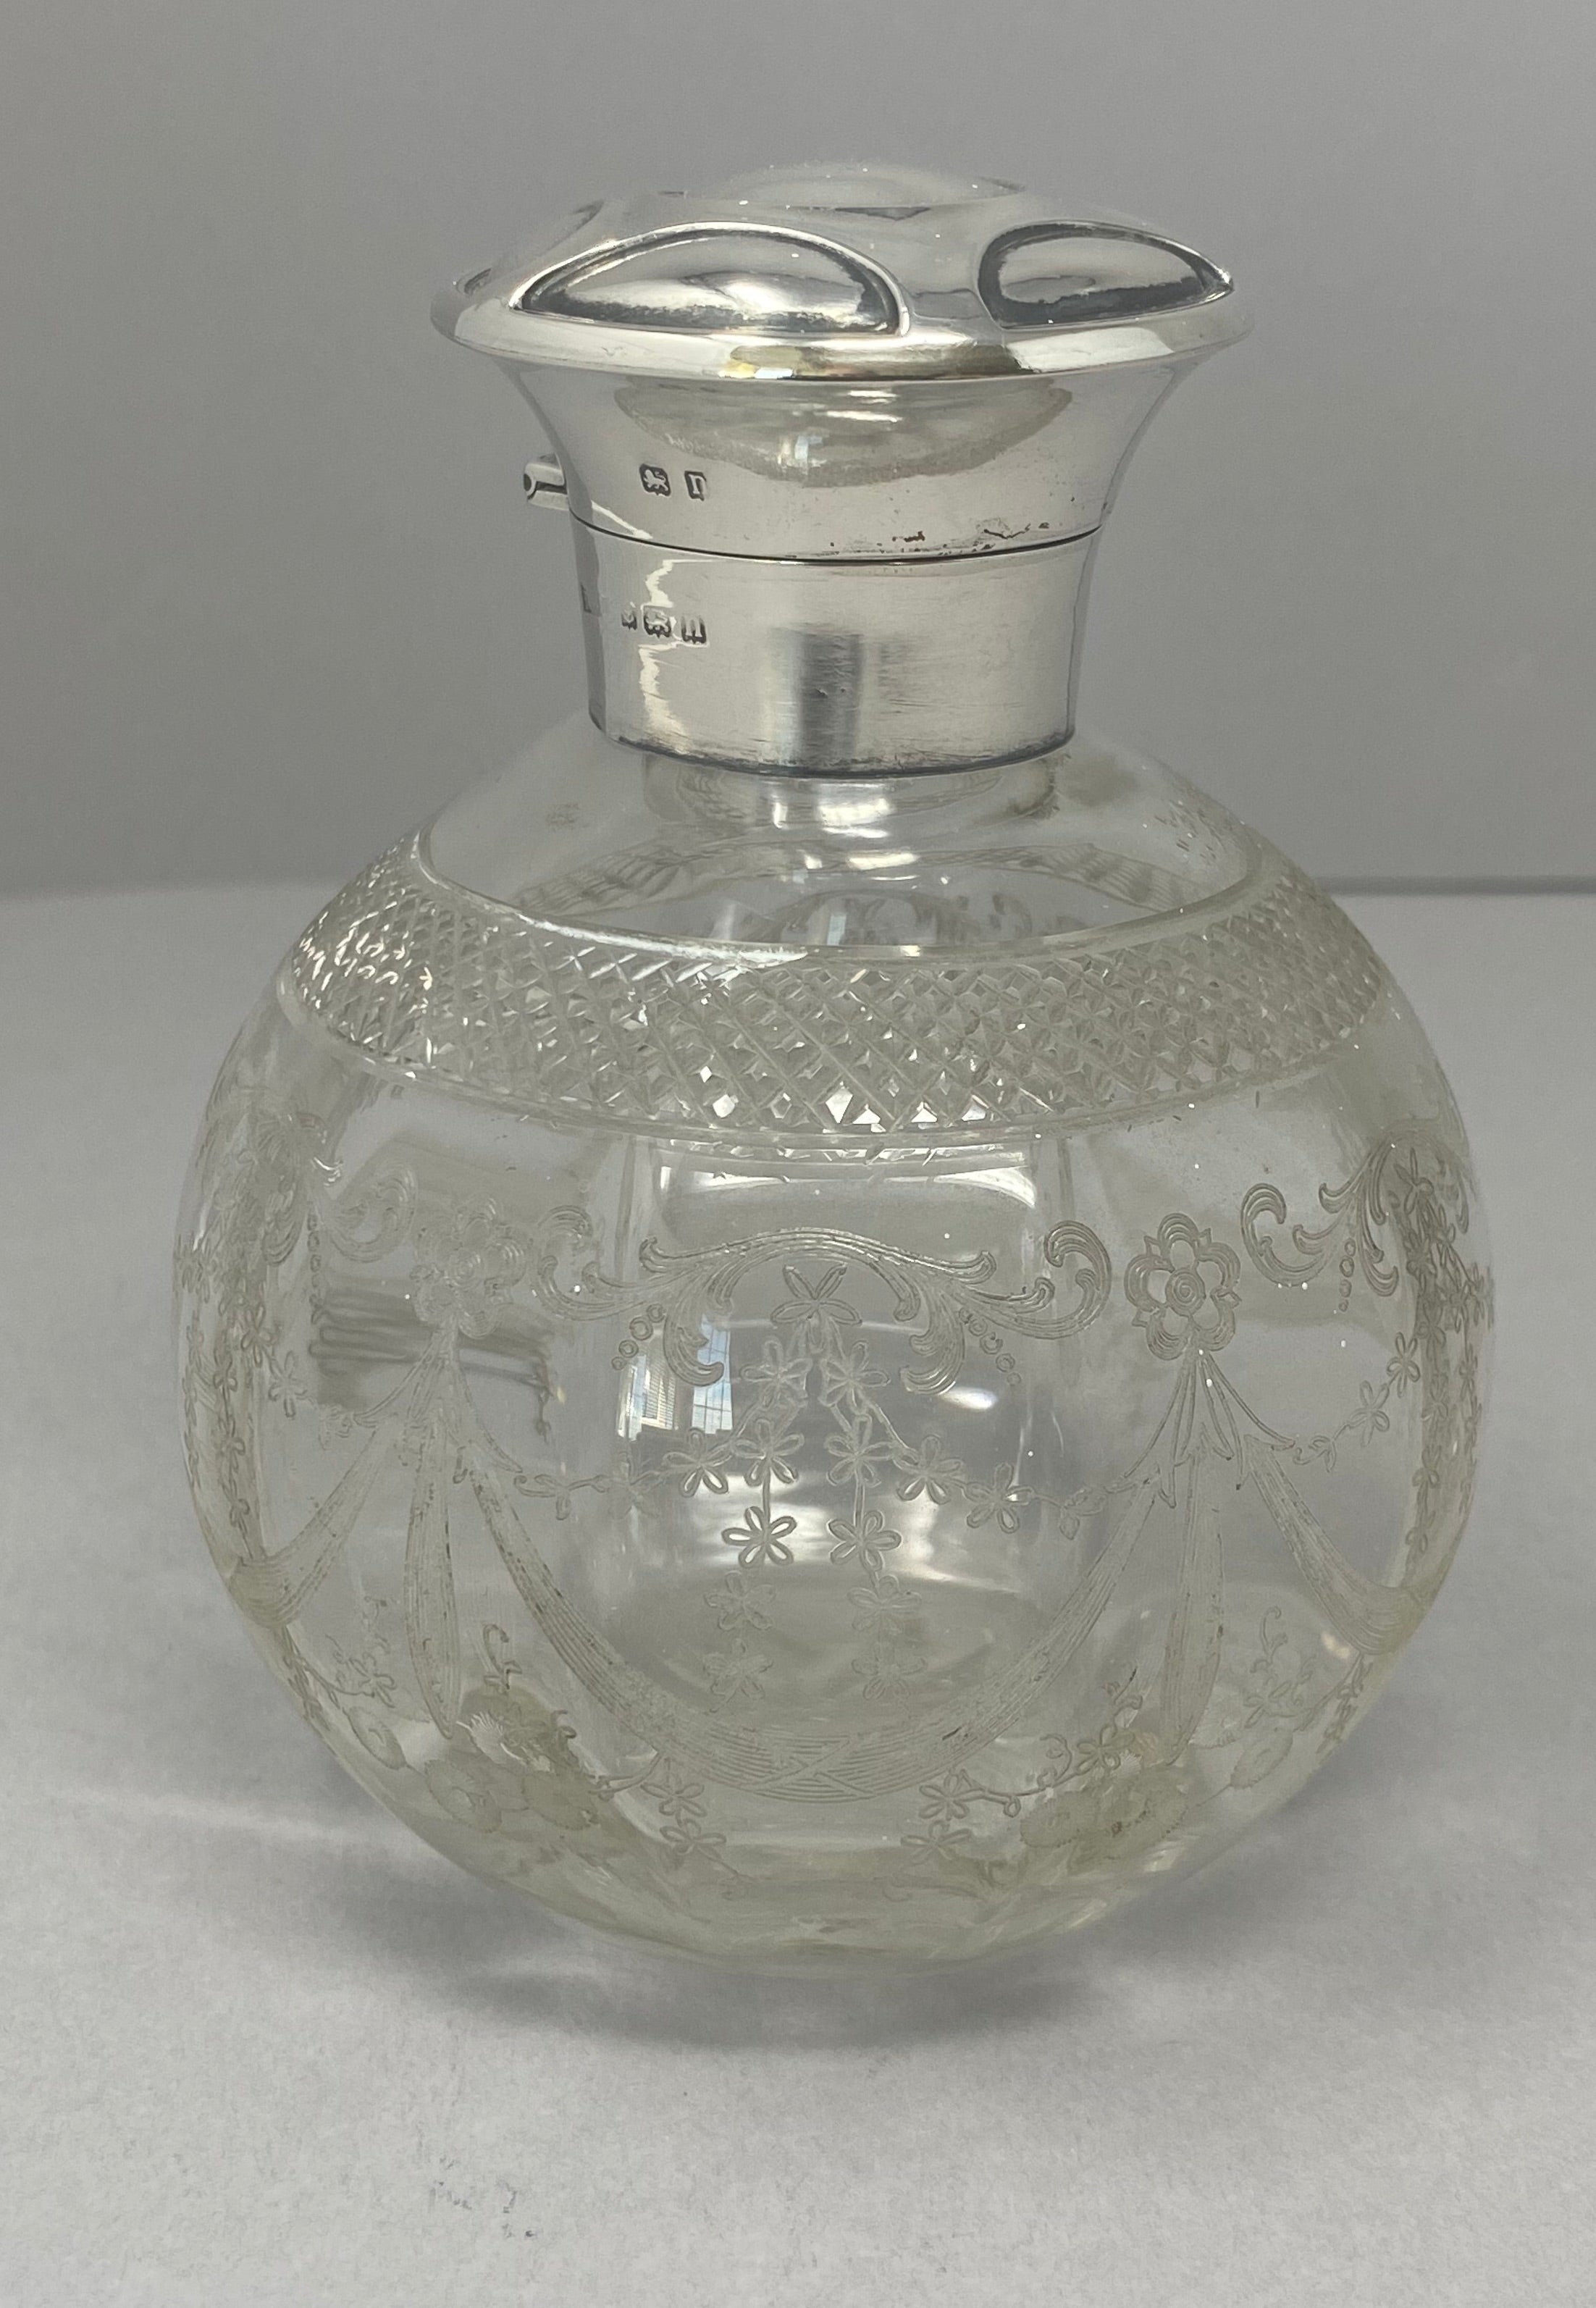 Antique Silver and Glass Perfume Bottle